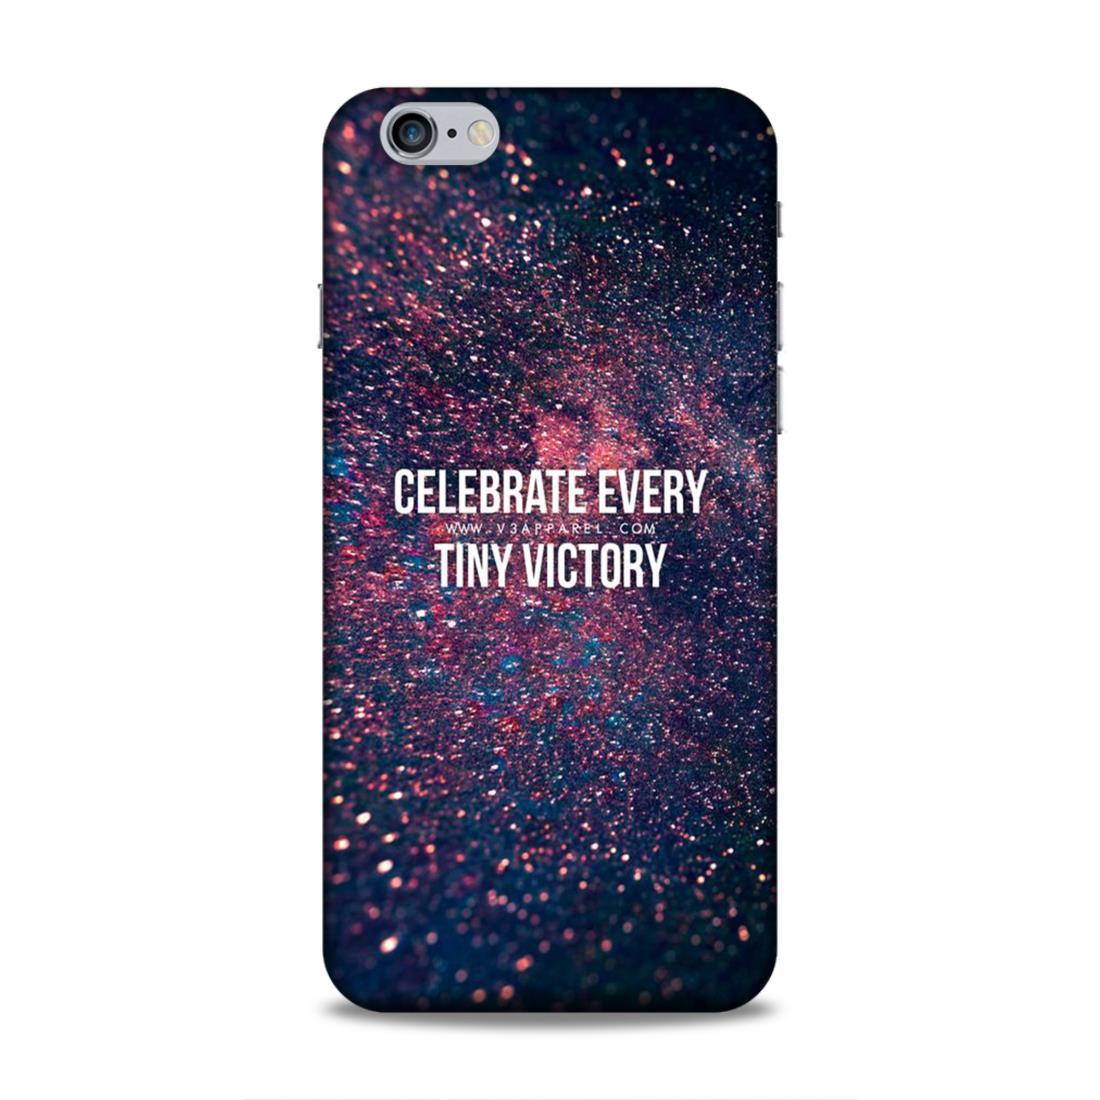 Celebrate Tiny Victory iPhone 6 Plus Mobile Cover